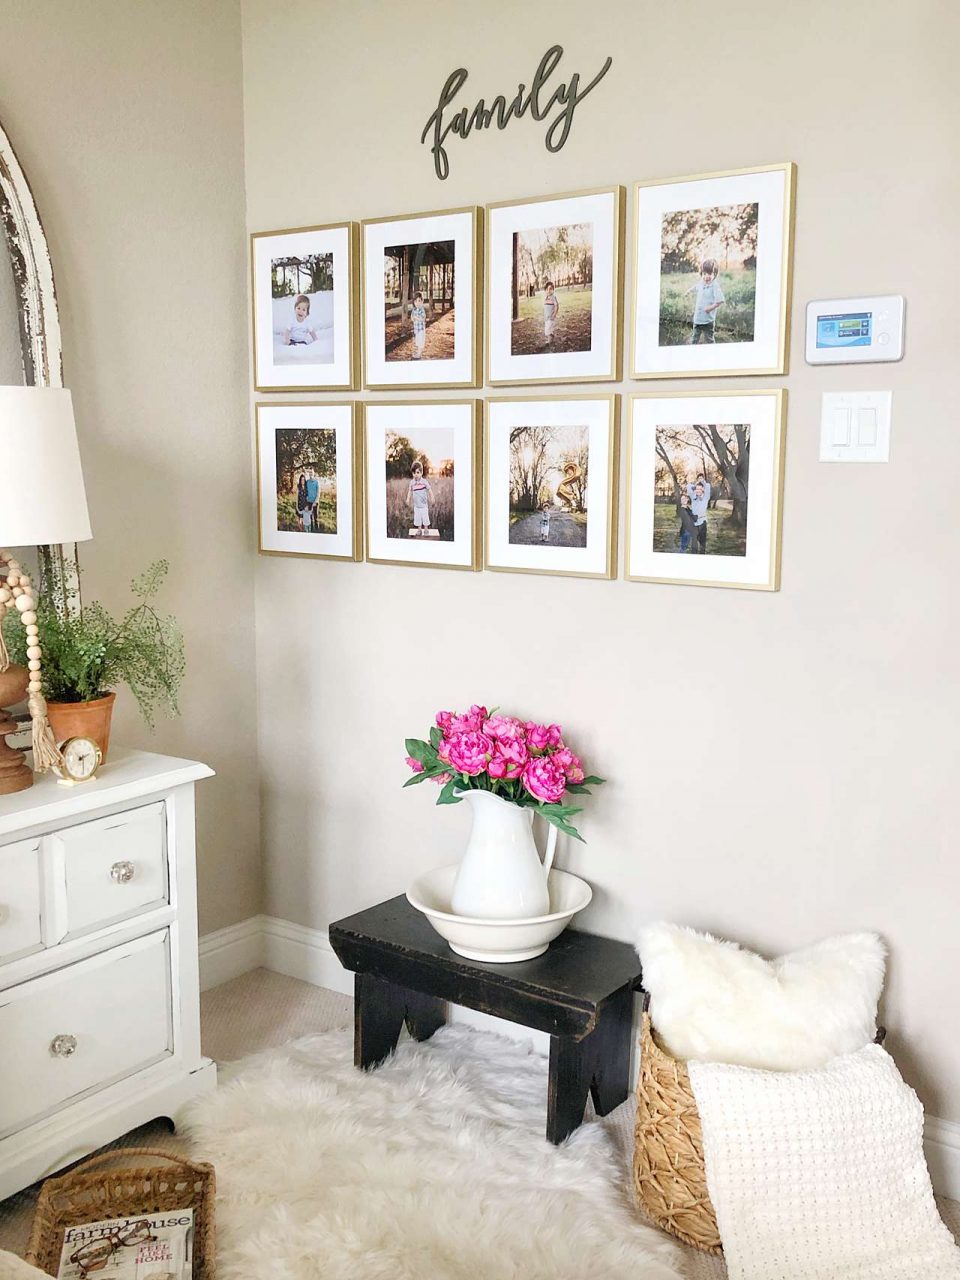 Making a House Feel Like Home: Family Picture Frame Inspiration